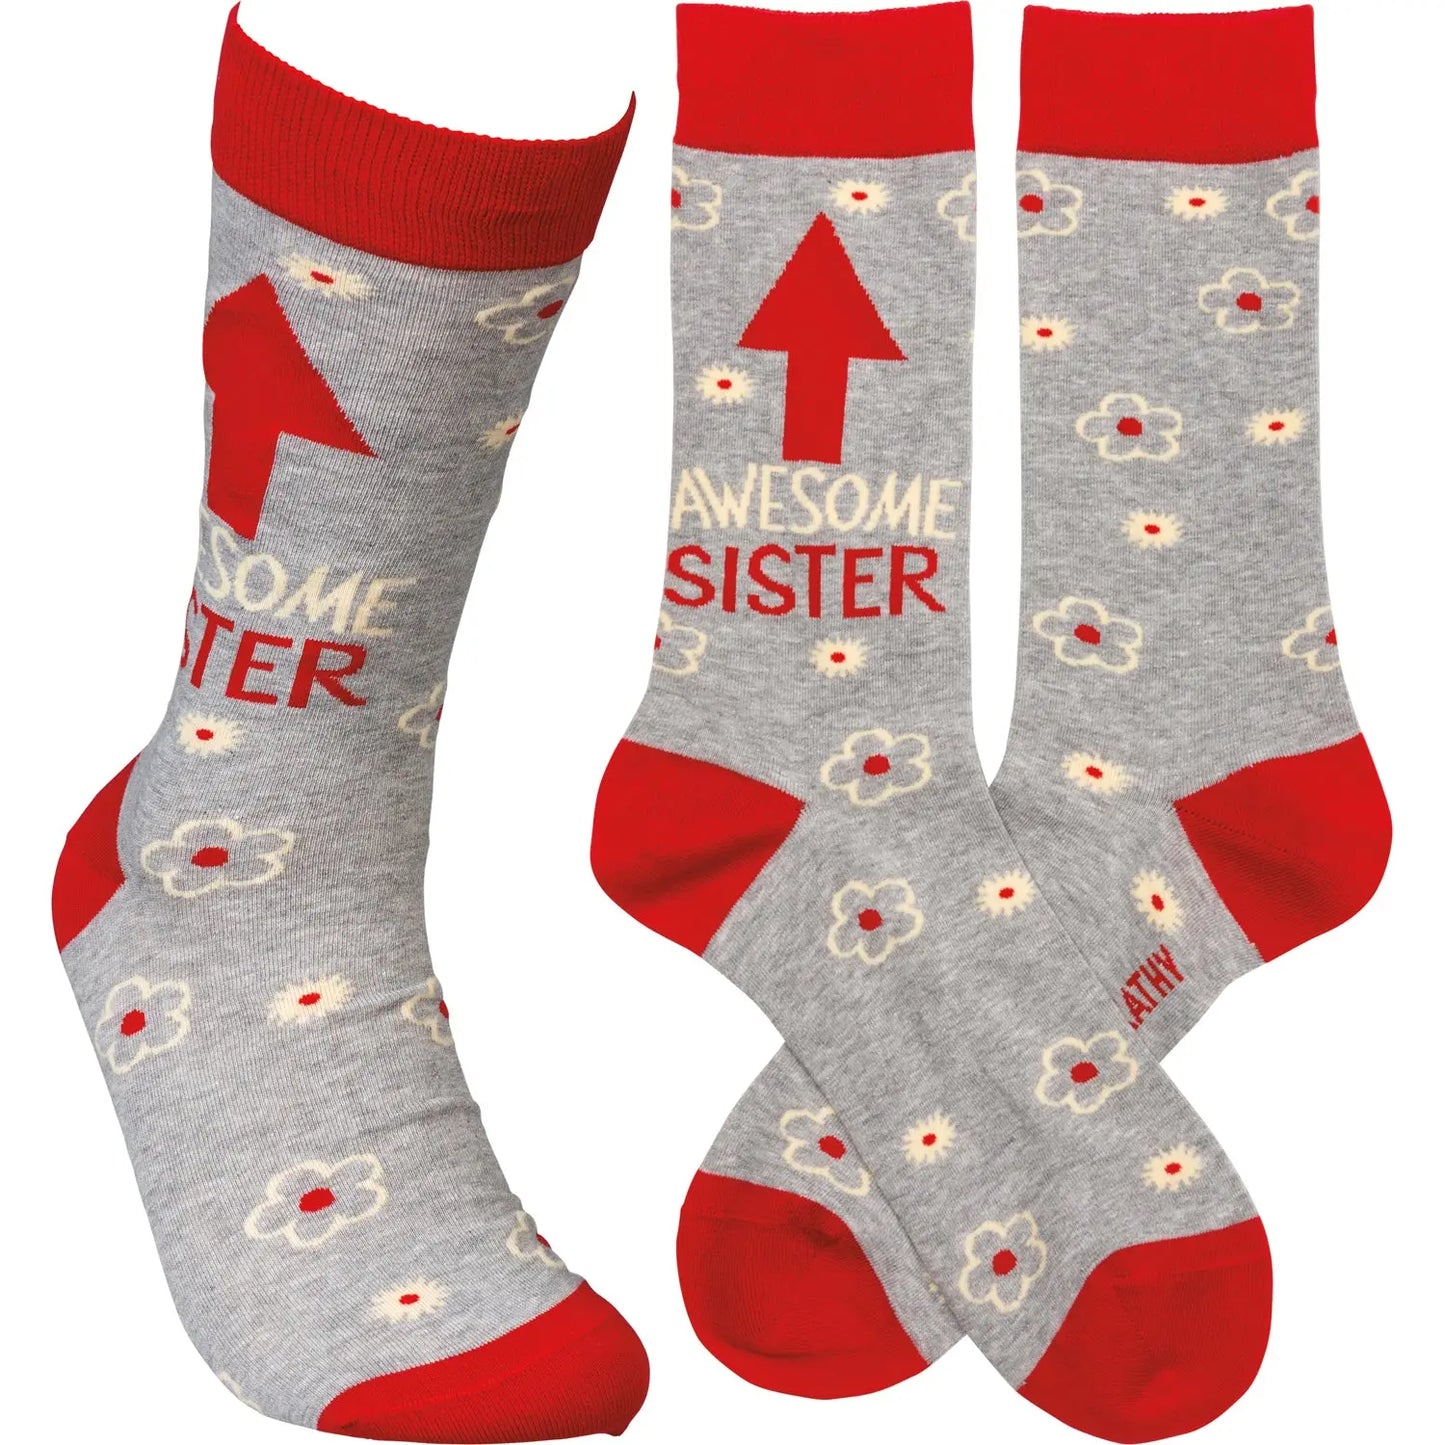 Primitives By Kathy - "Awesome Sister" Socks PRIMITIVES BY KATHY